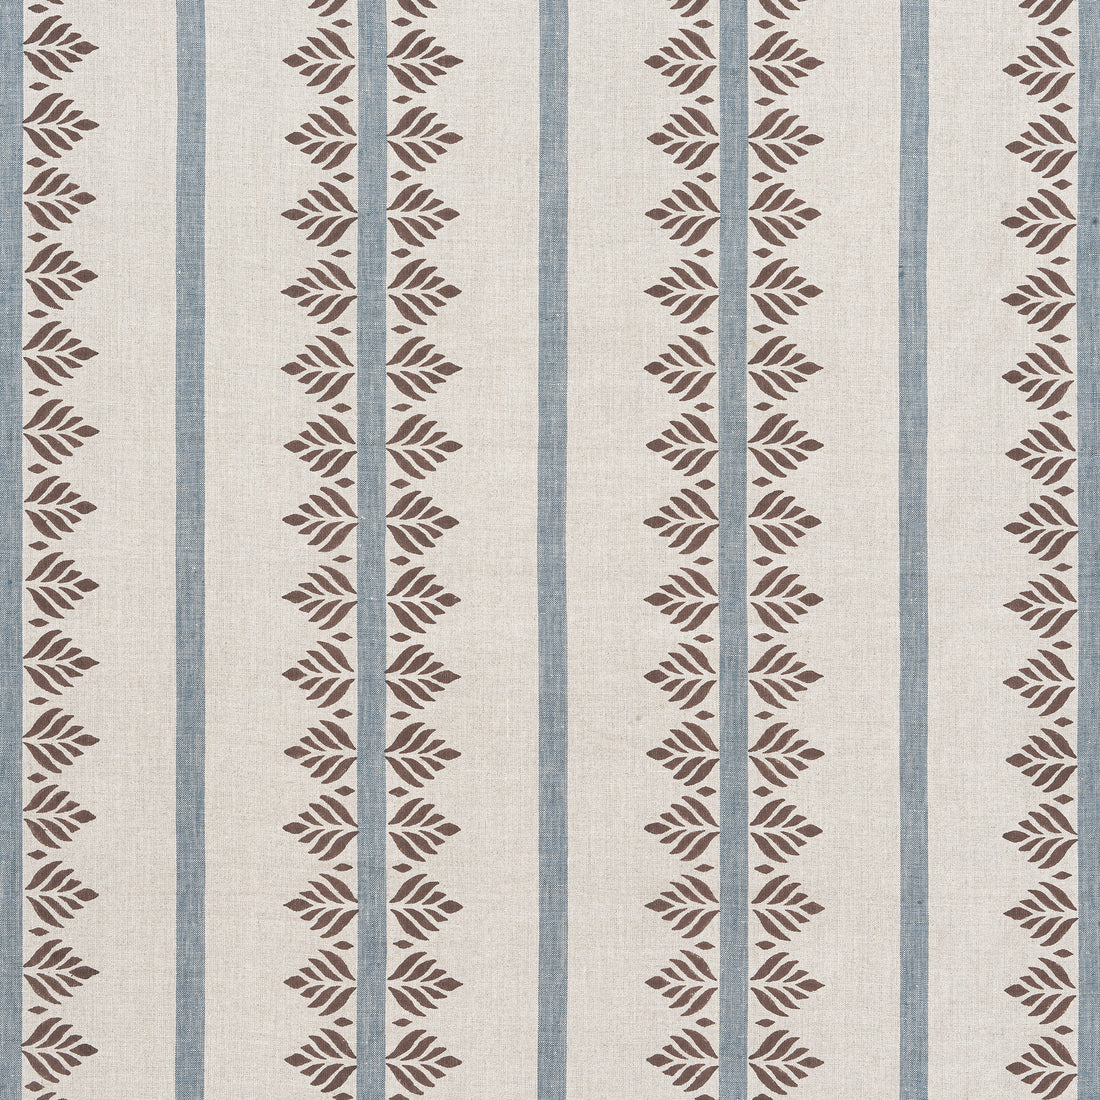 Fern Stripe fabric in brown and slate color - pattern number AF15106 - by Anna French in the Antilles collection